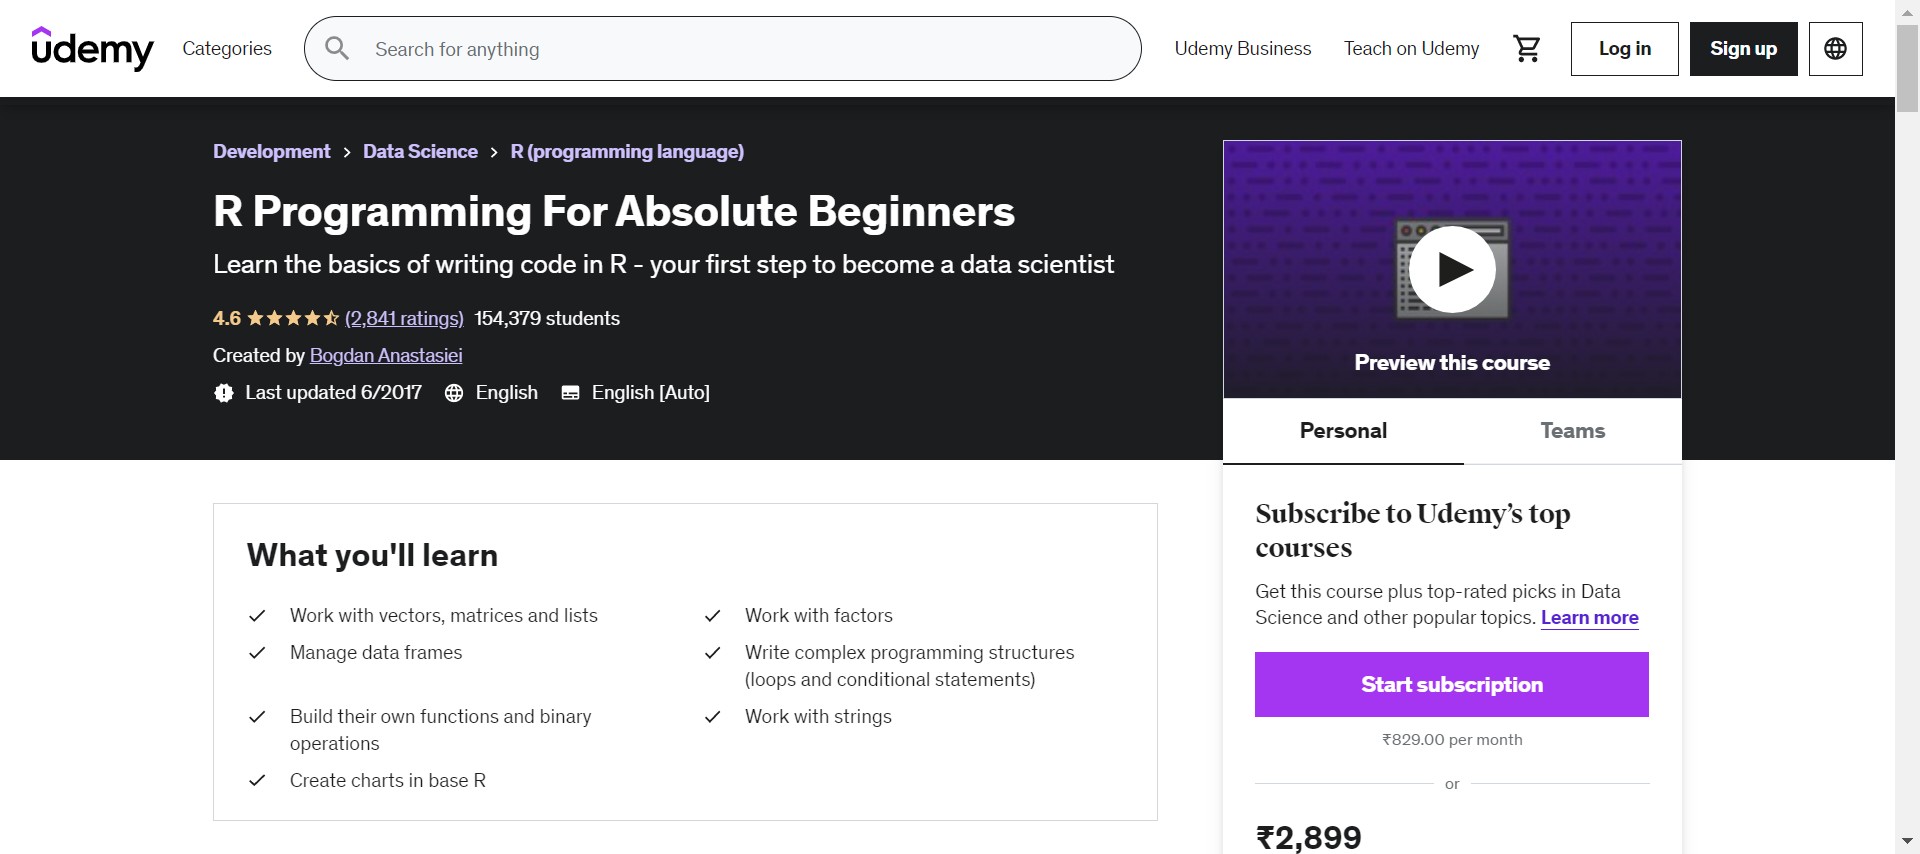 R Programming for Absolute Beginners